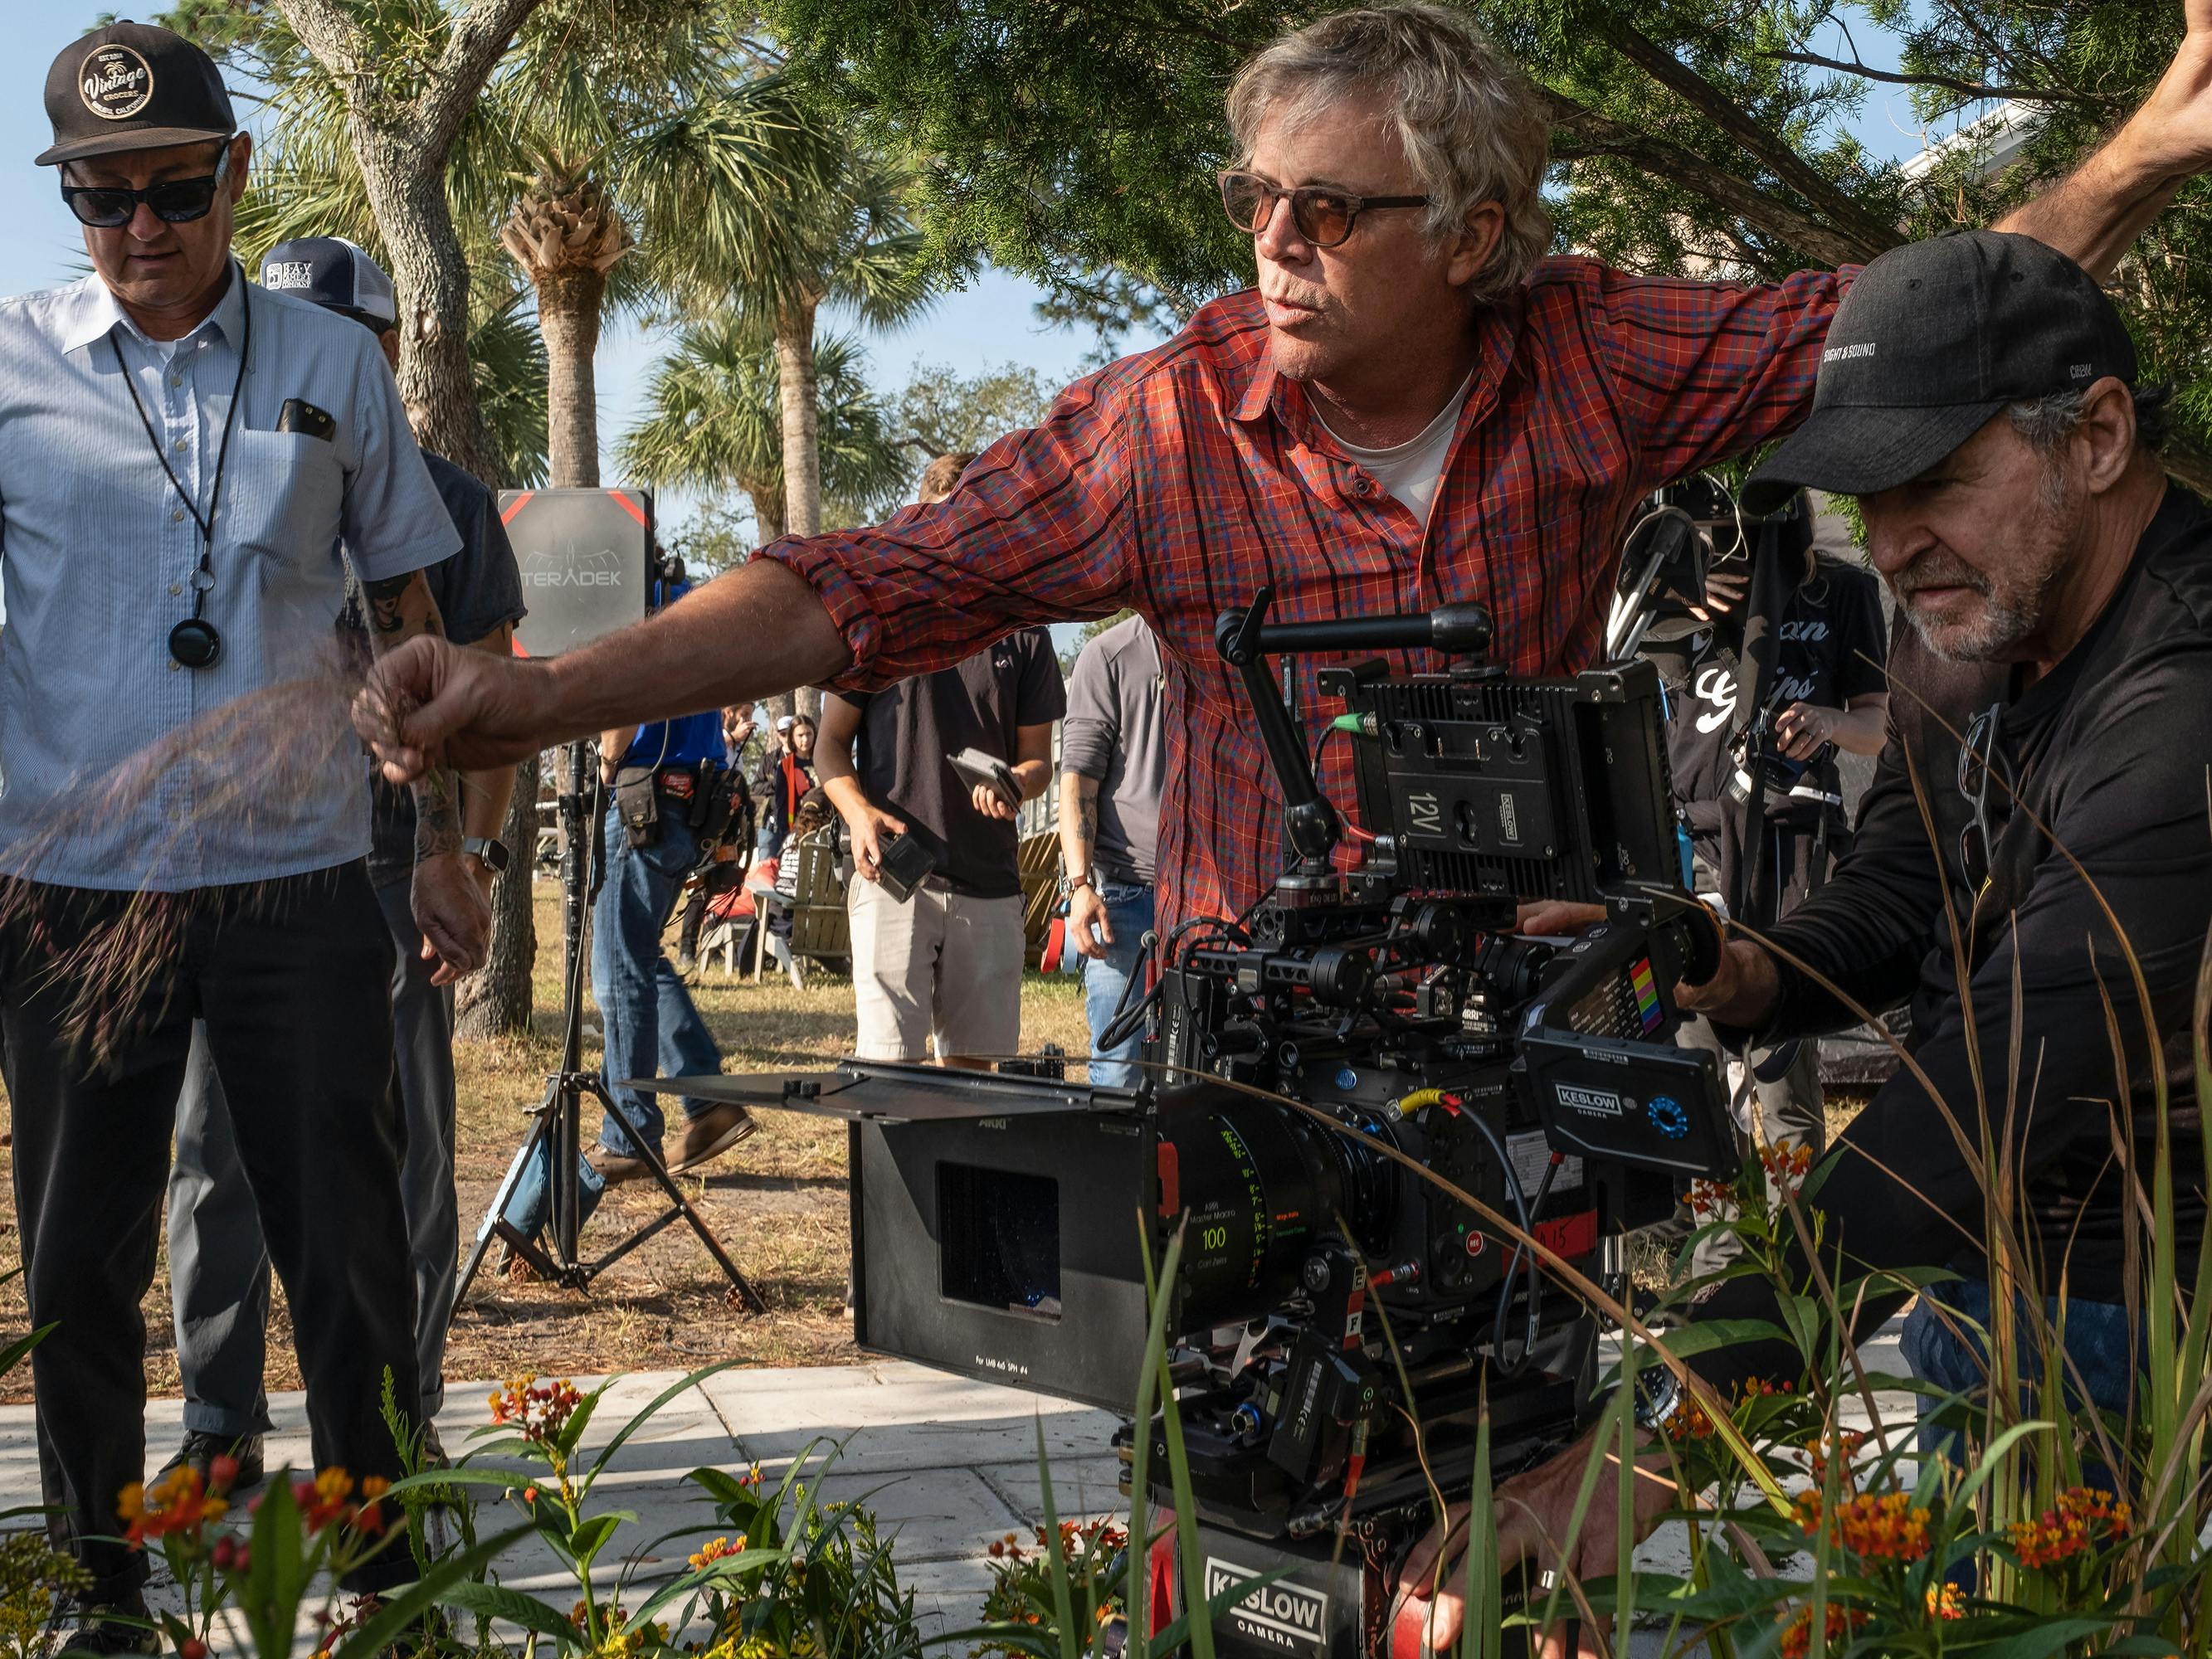 Todd Haynes behind the scenes of May December. He wears a red checkered shirt and sunglasses and talks to a man wearing all black crouching in some grass and flowers behind a massive camera.